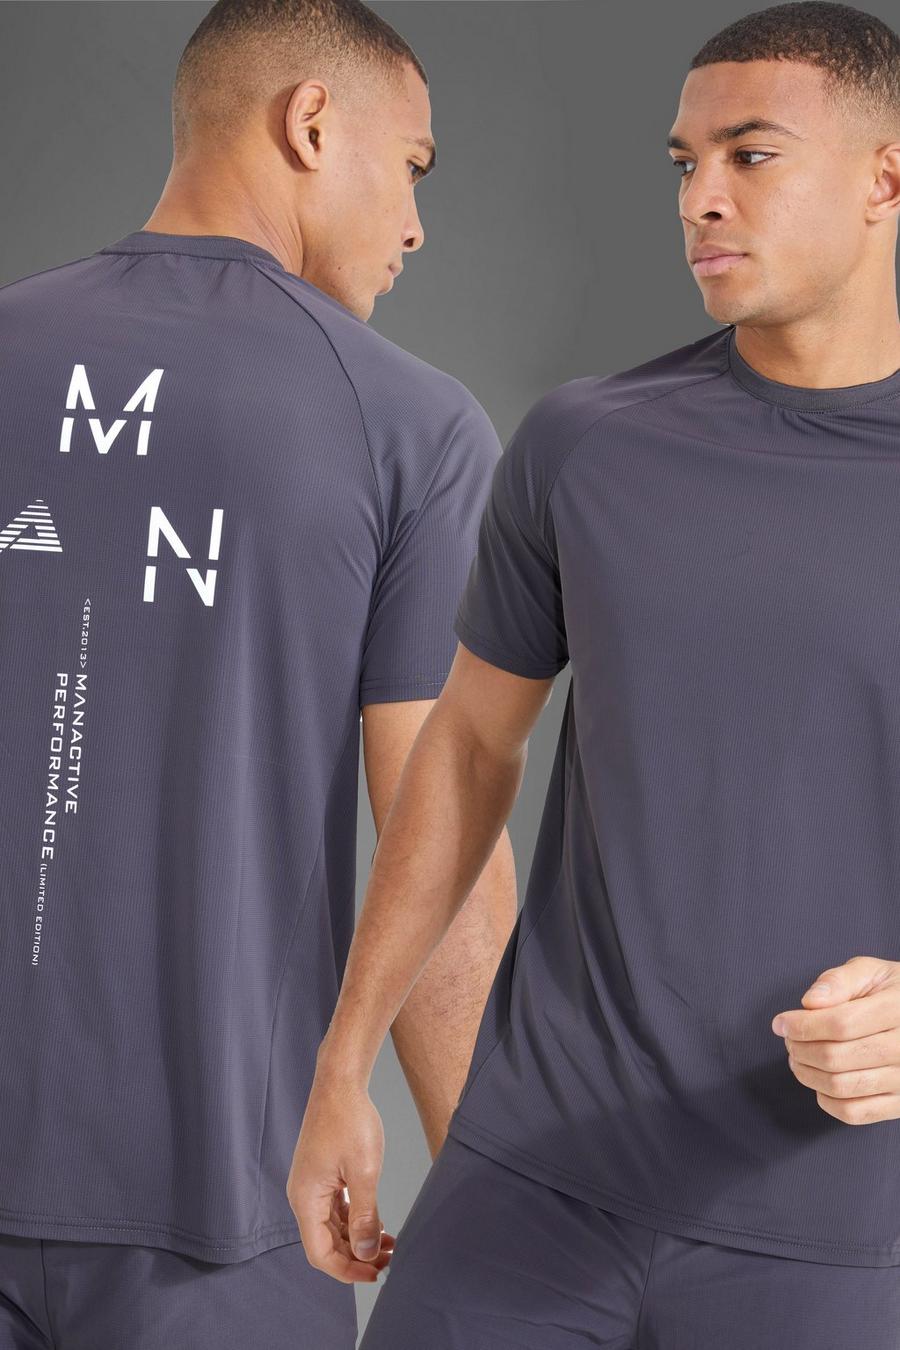 T-shirt Man Active Gym con stampa riflettente sul retro, Charcoal image number 1